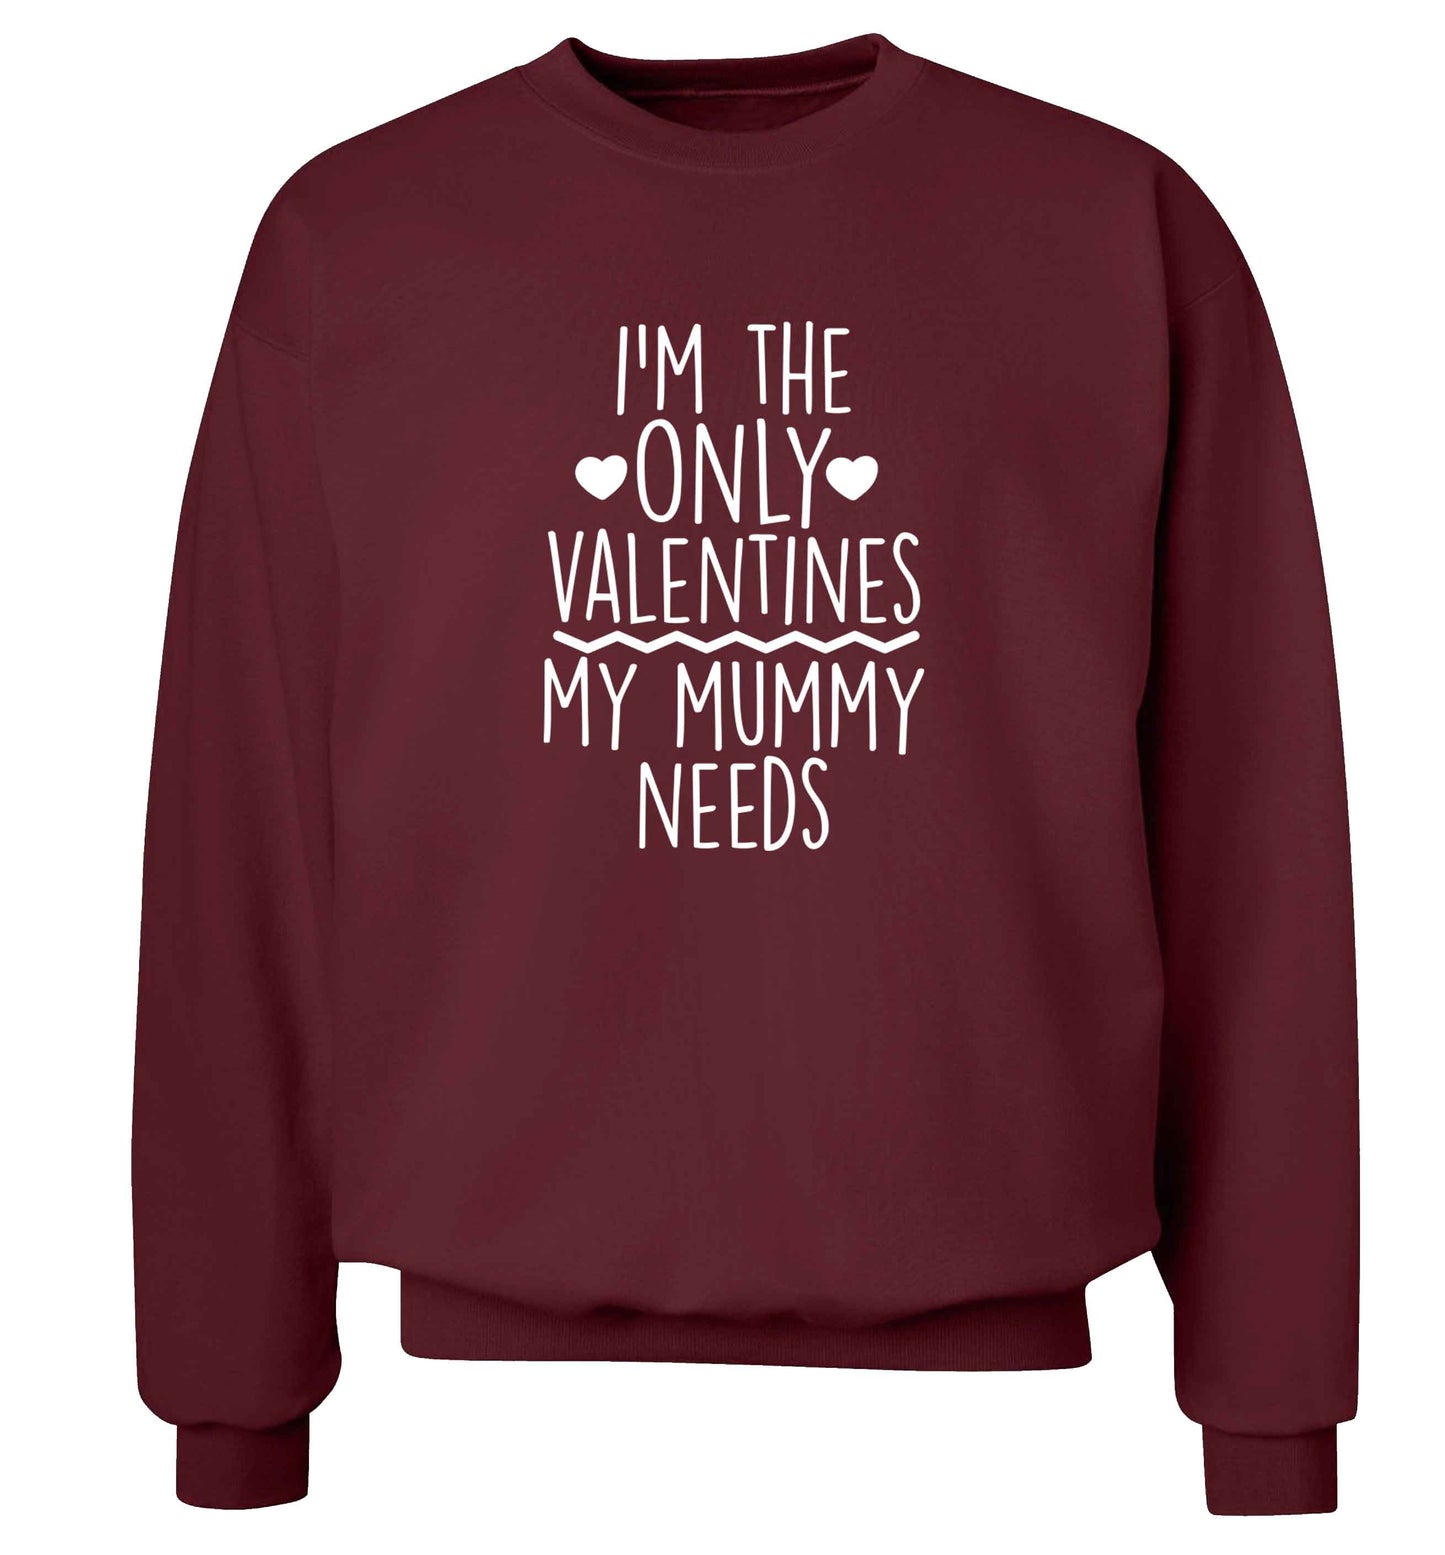 I'm the only valentines my mummy needs adult's unisex maroon sweater 2XL